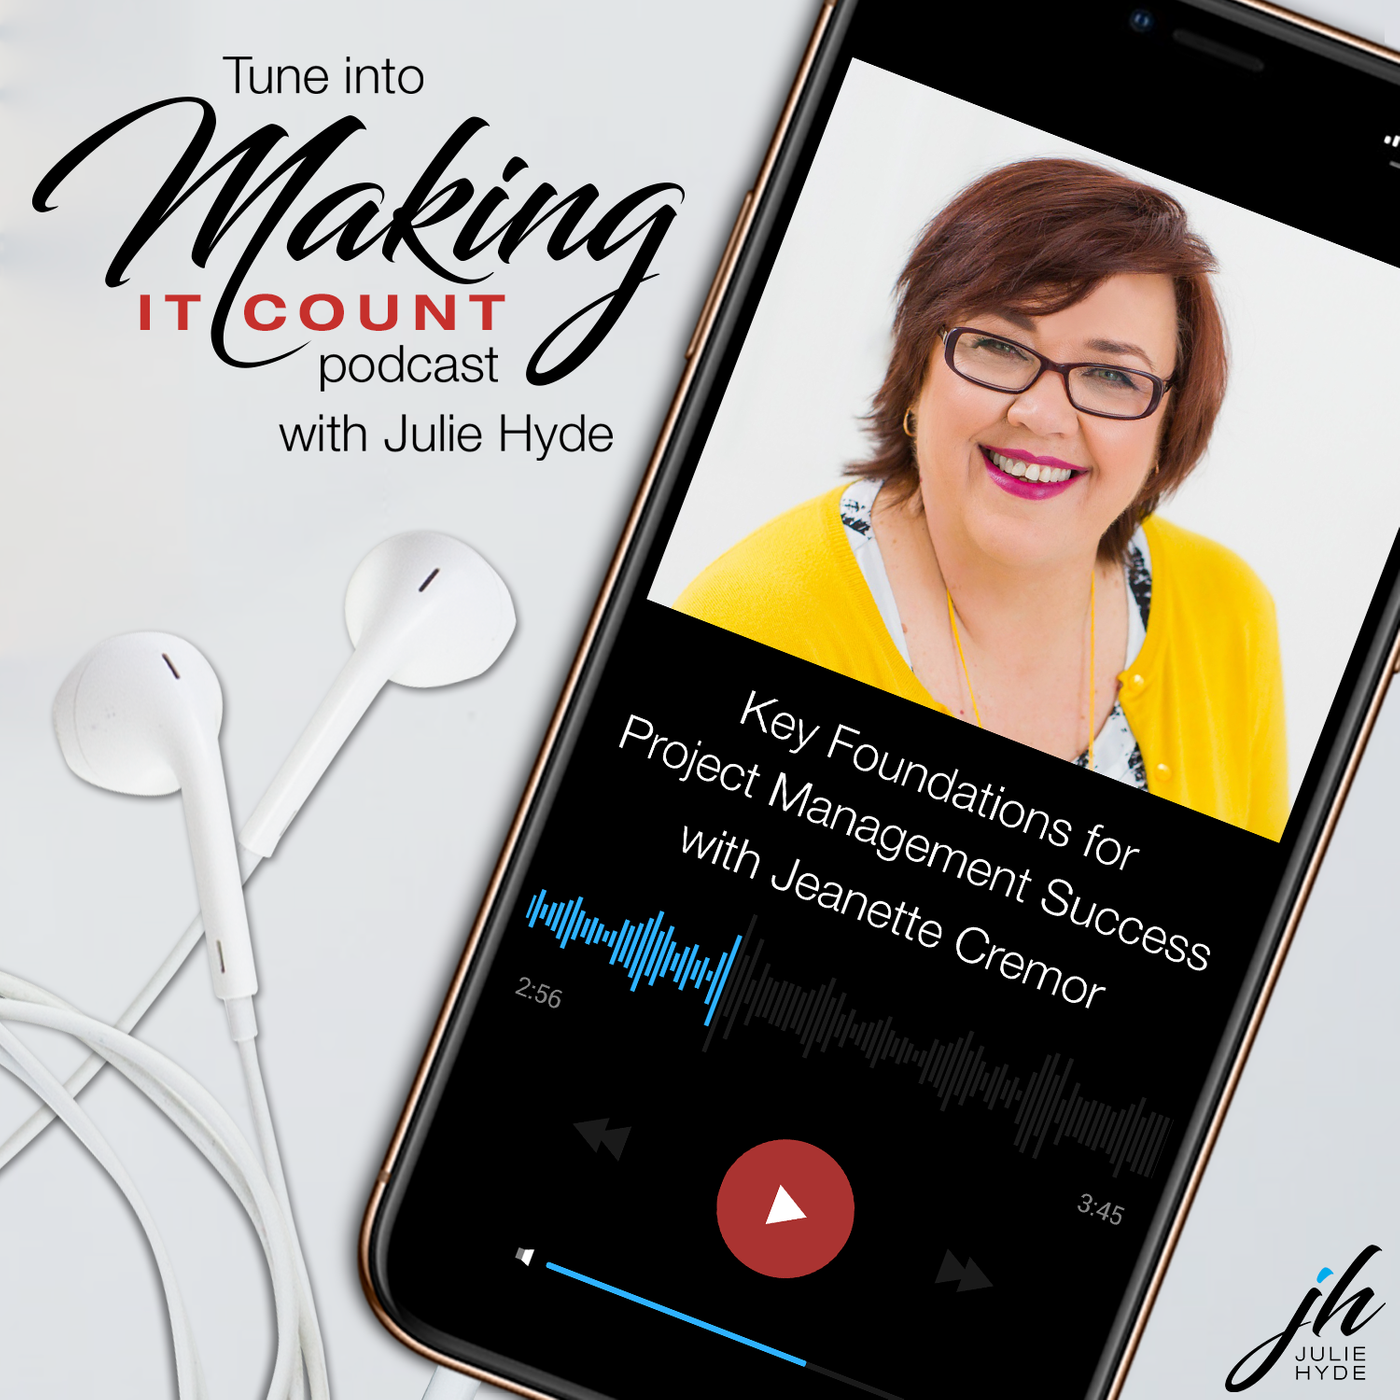 jeanette-cremor-key-foundations-for-project-management-success-julie-hyde-making-it-count-busy-leadership-leader-leaders-keynote-mindset-speaker-mentor-business-empower-lead-empowering-podcast-great-intentional-authentic-mentor-coach-role-model-top-best-inspire-engage-practical-insightful-boost-performance-tips-how-to-strategy-powerful-change-mindset-thrive-results-corporate-future-smart-program-mentorship-career-next-level-step-reconnect-control-proactive-agile-adaptable-one-on-one-woman-lady-boss-female-sydney-australia-speaker-host-guide-guidance-business-ceo-management